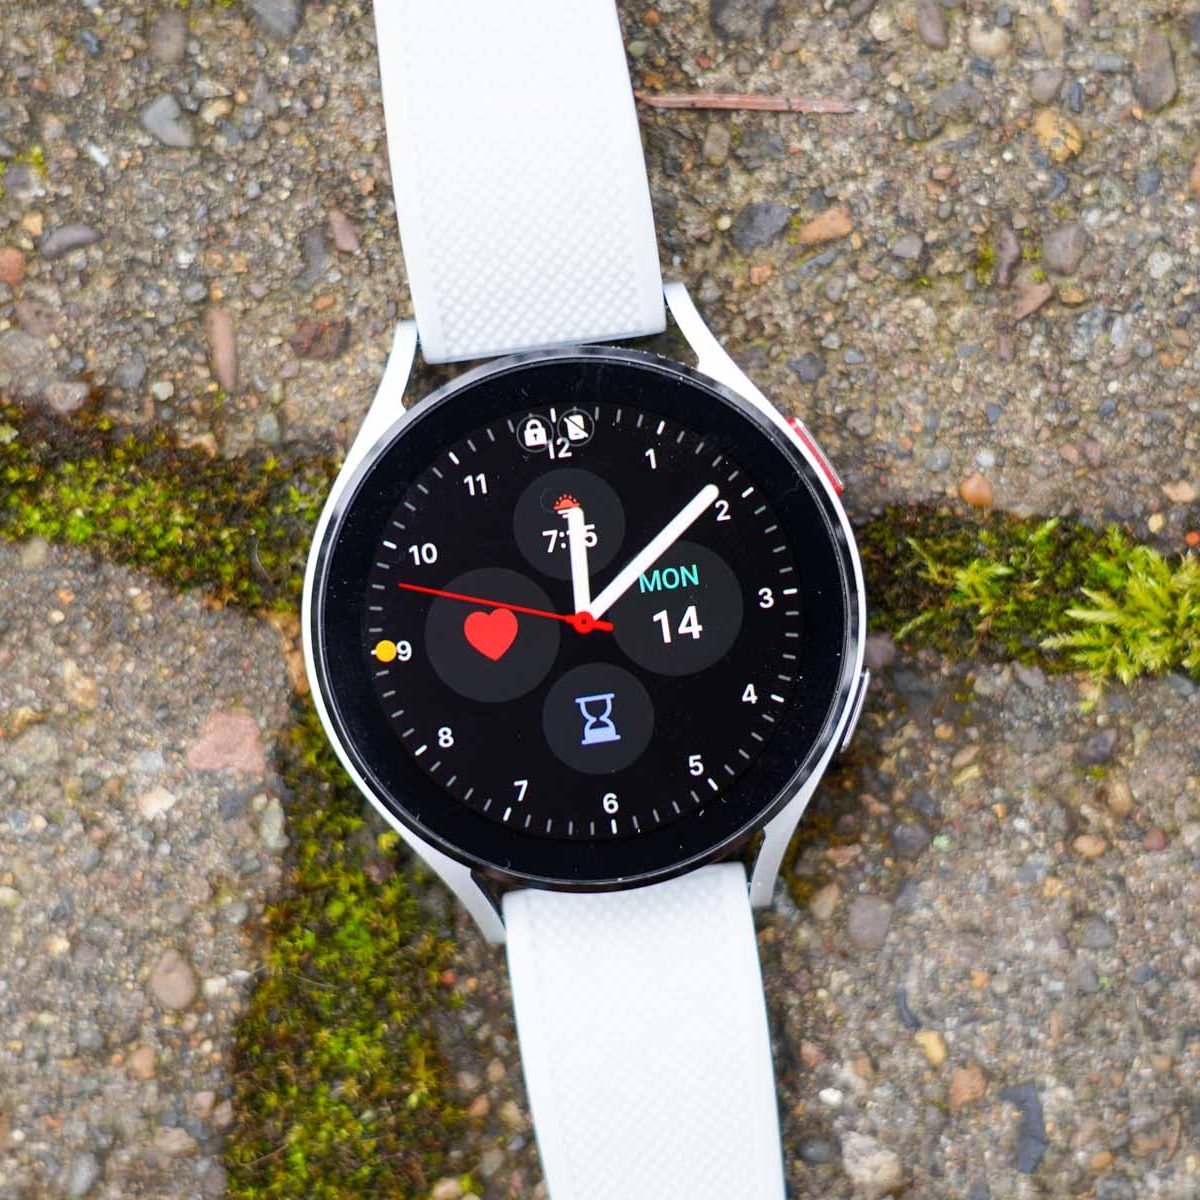 Google's new Wear OS 4 brings better battery life - The Verge